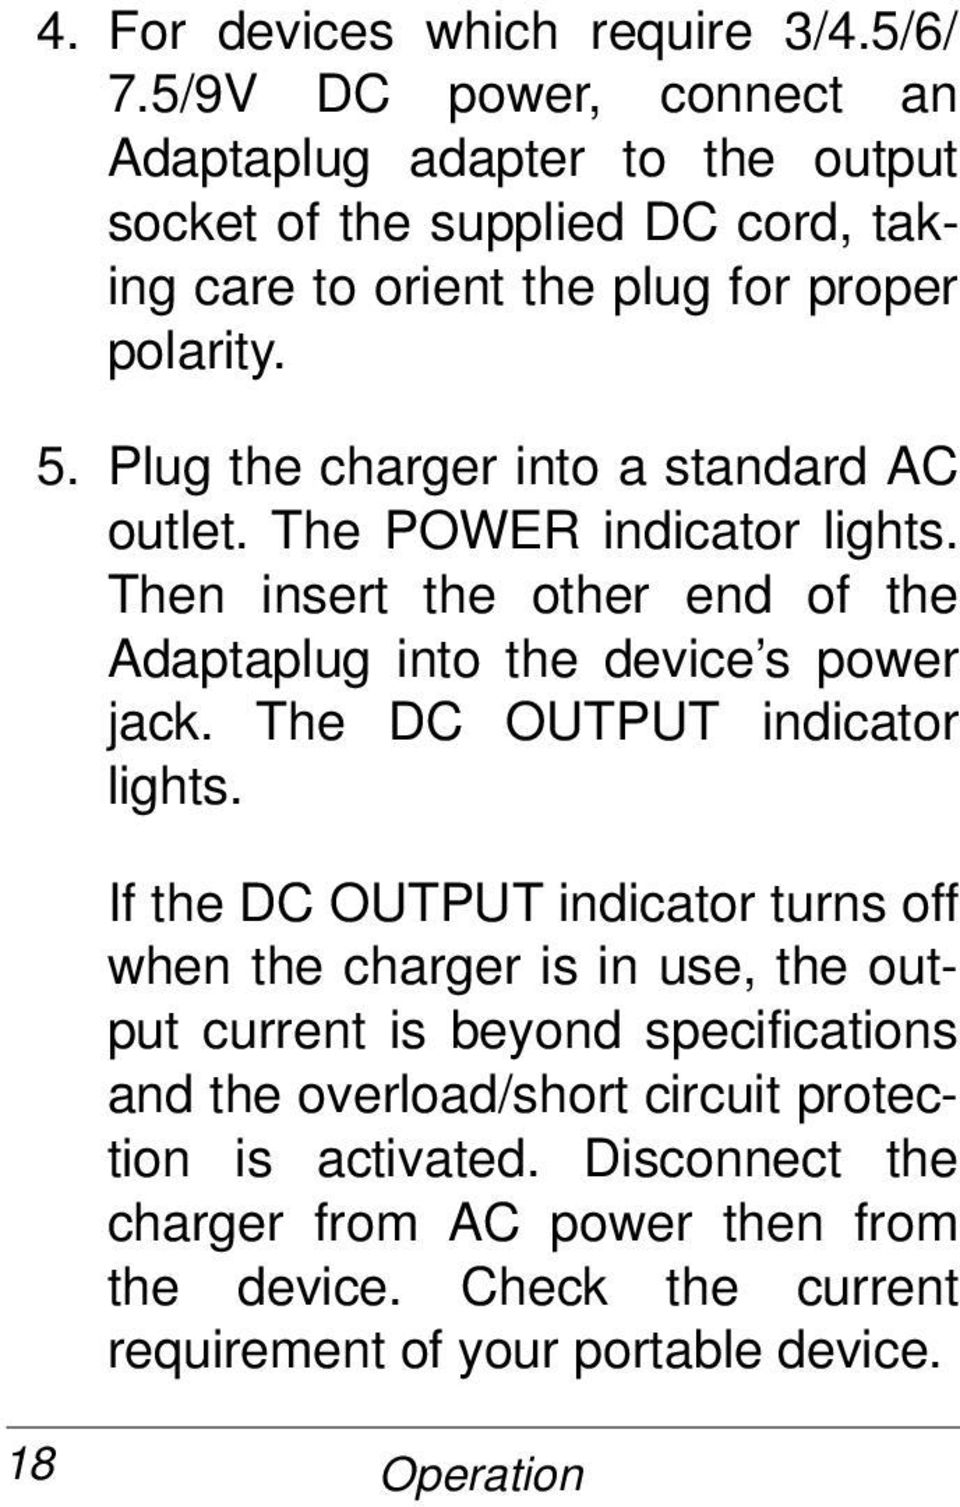 Plug the charger into a standard AC outlet. The POWER indicator lights. Then insert the other end of the Adaptaplug into the device s power jack.